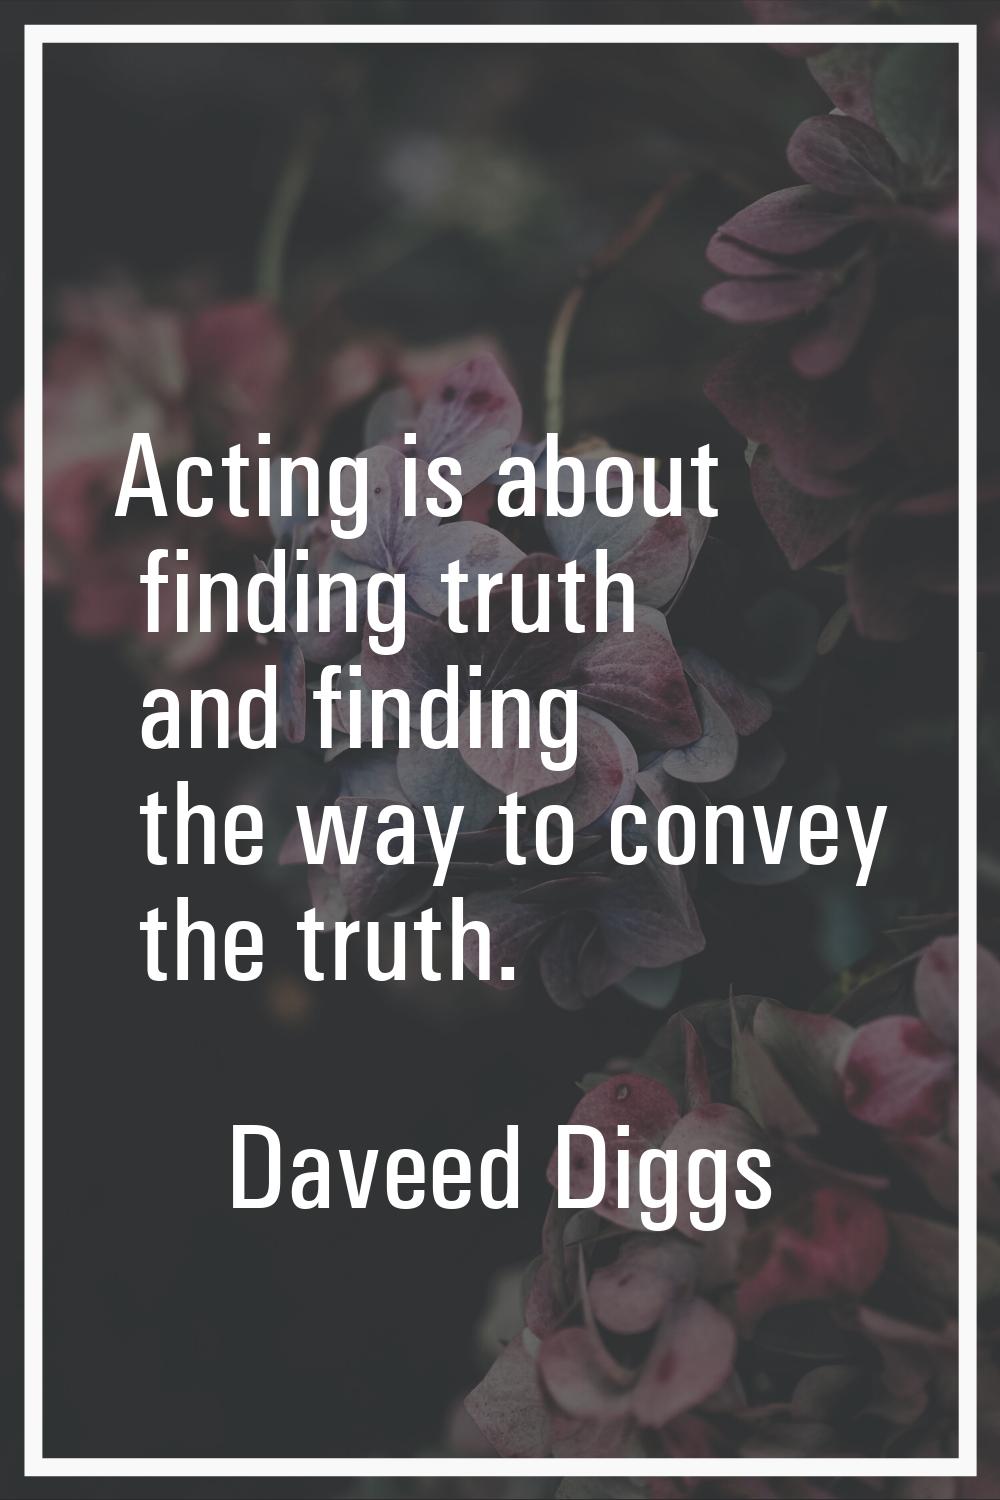 Acting is about finding truth and finding the way to convey the truth.